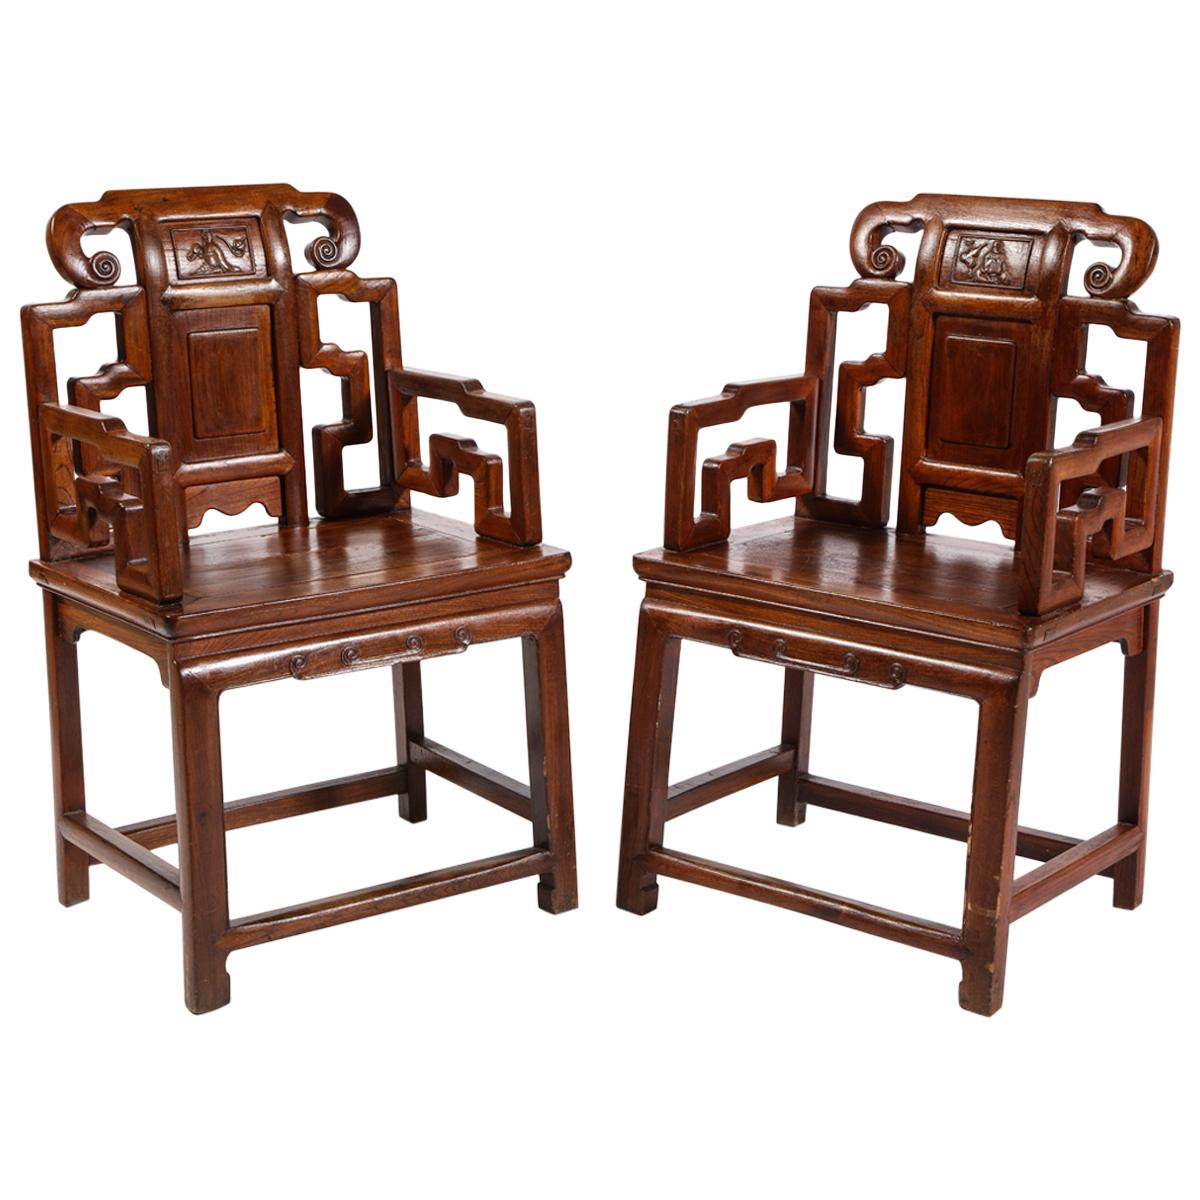 Pair of Chinese Hardwood Chairs with Fretwork Designs and High Relief Panels